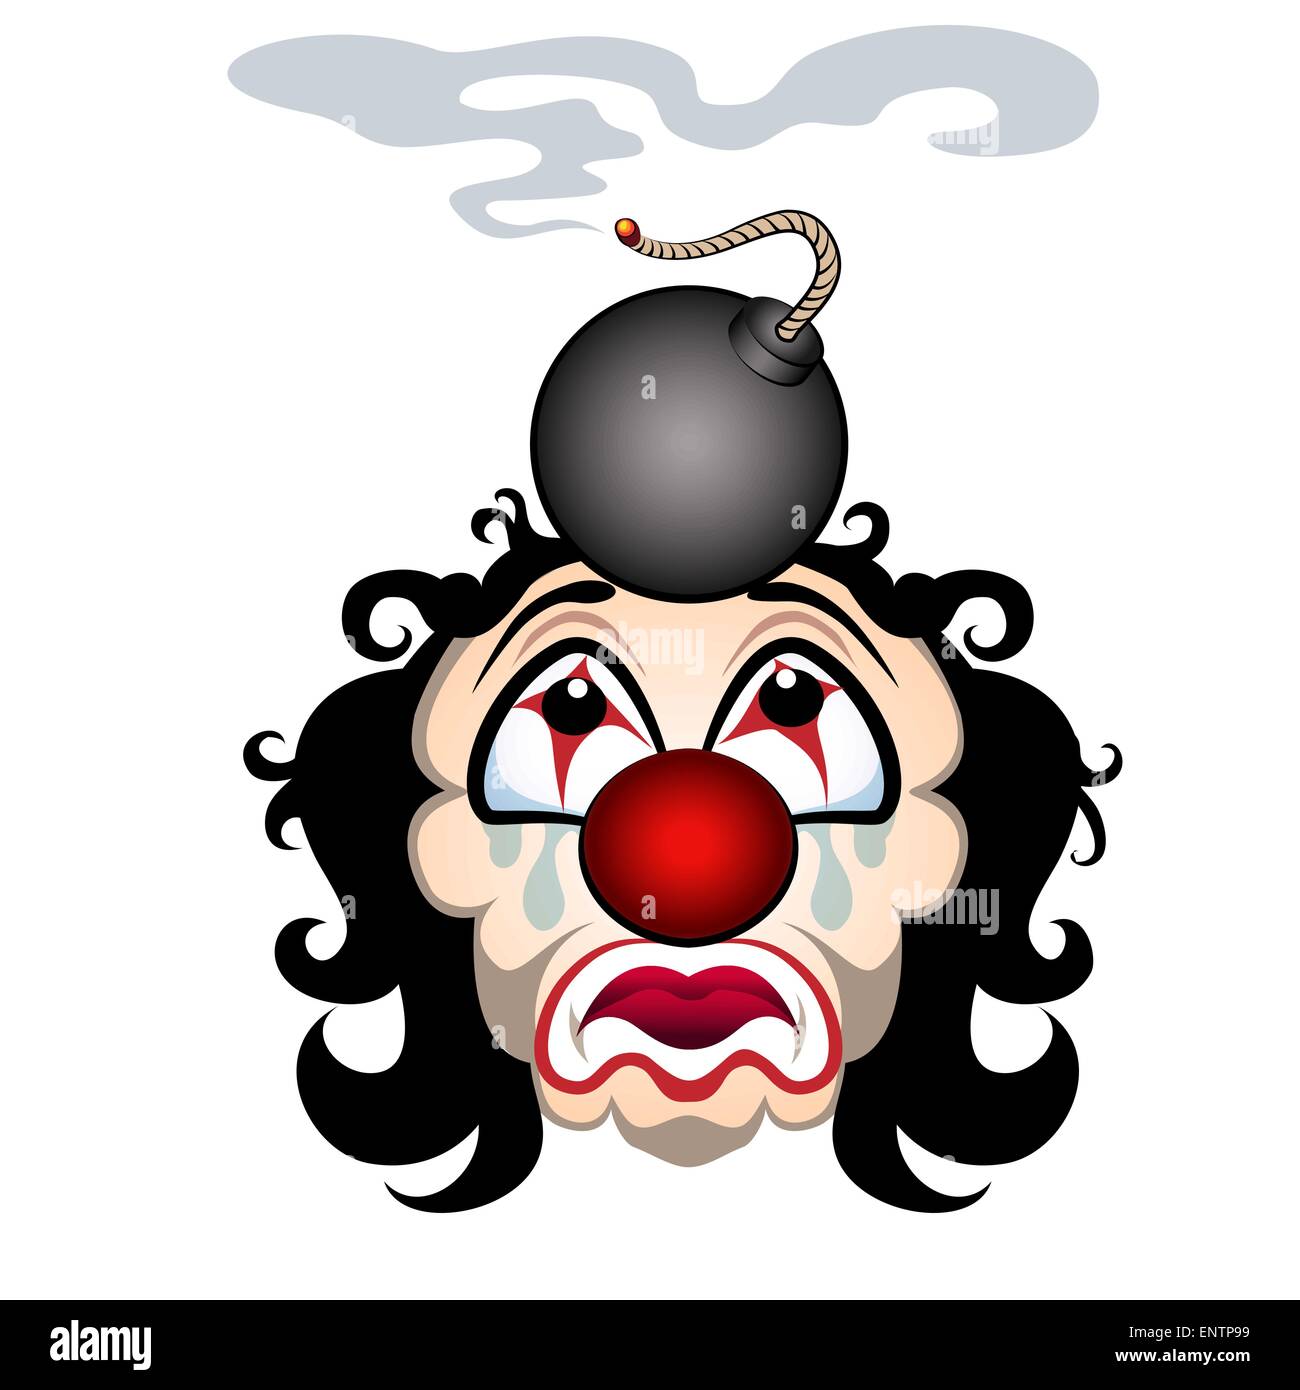 Comic Illustration Of The Sad Clown With The Lit Bomb On His Head Stock Vector Image Art Alamy